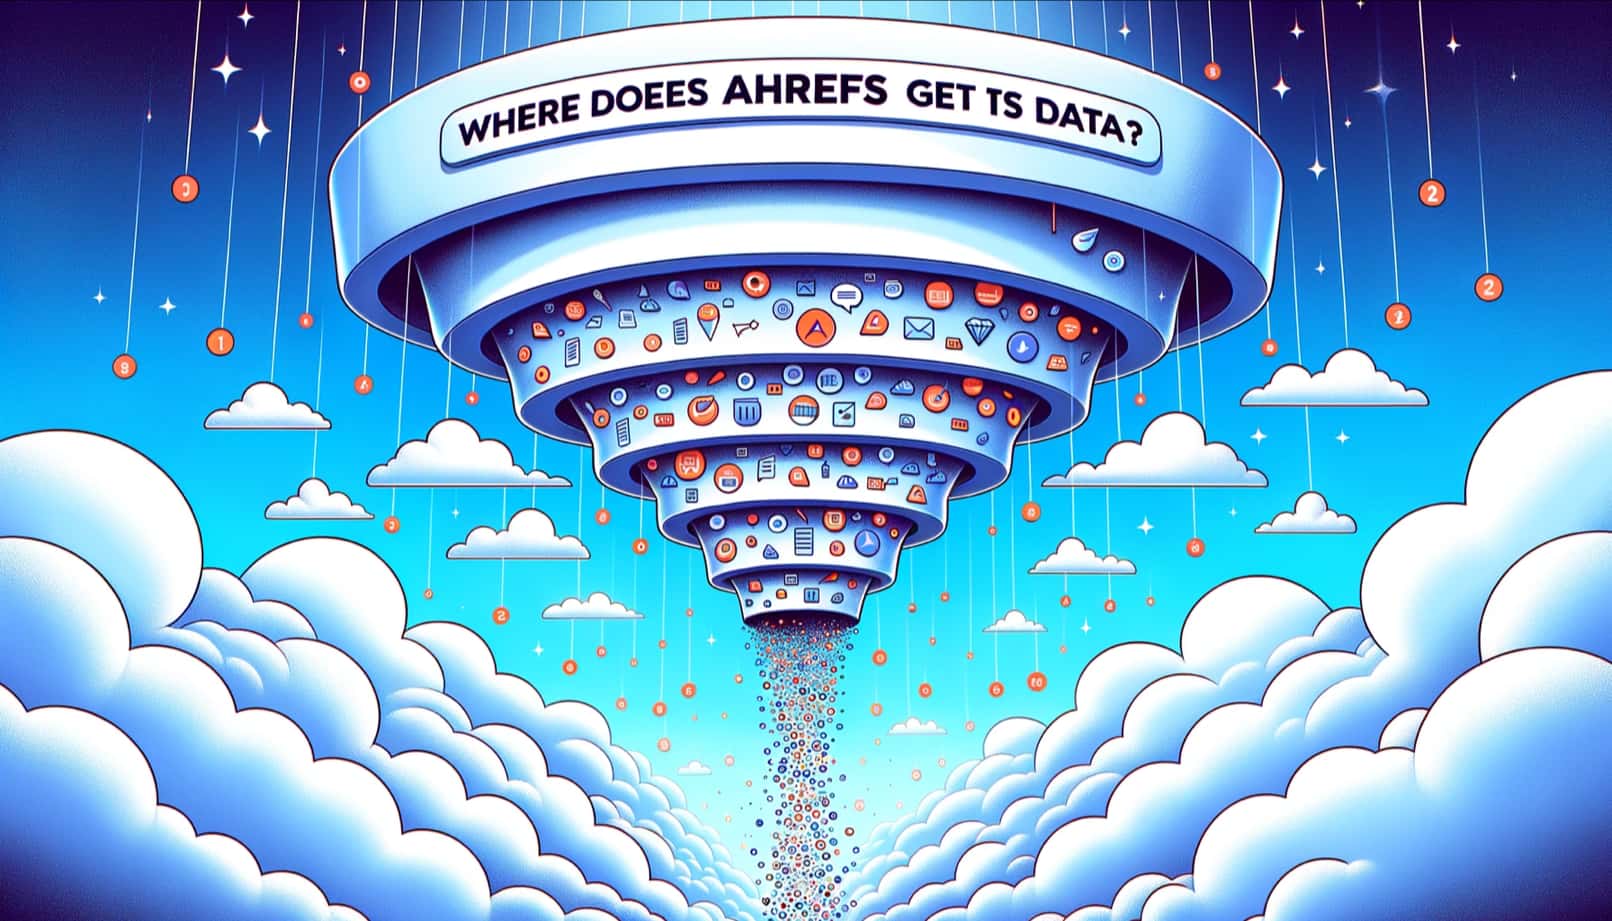 where does ahrefs data come from